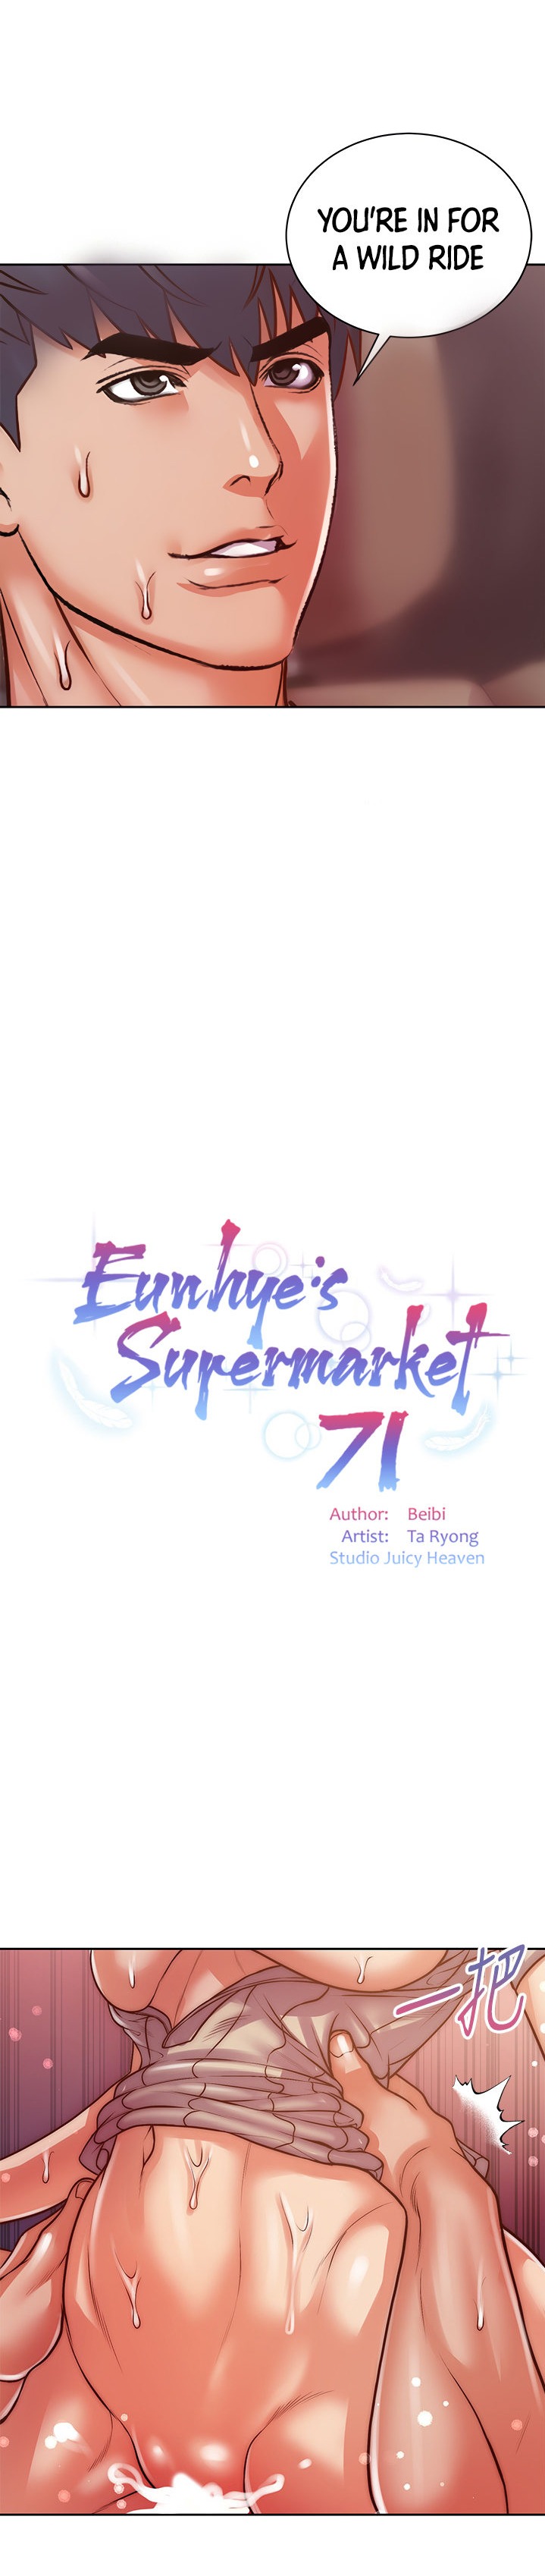 Eunhye’s Supermarket - Chapter 71 Page 5